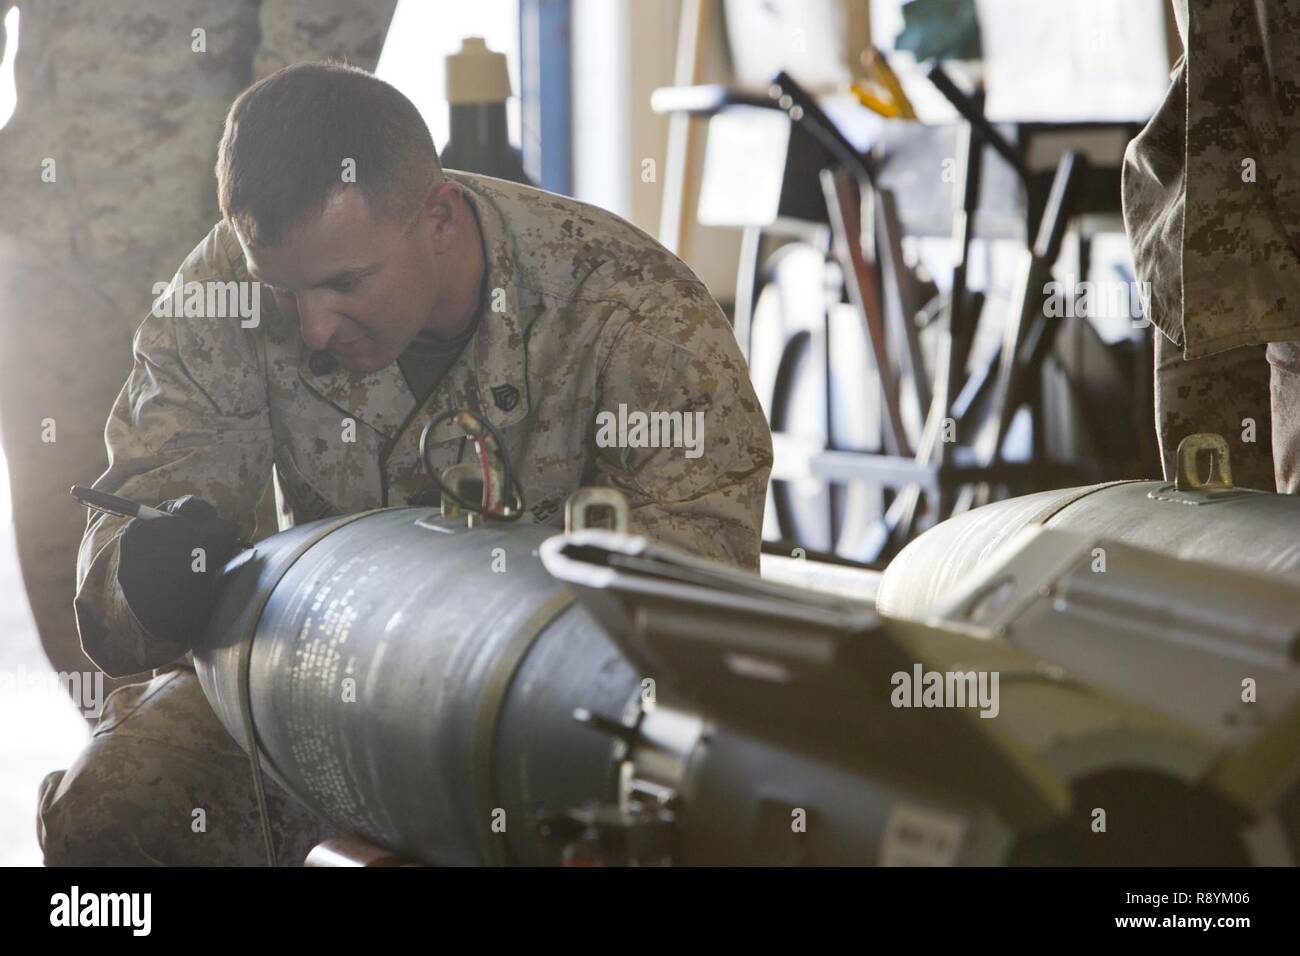 U.S. Marine Corps Staff Sgt. Jeffrey W. Stiles, an aviation ordnance system technician with Marine Aviation Logistics Squadron 13 (MALS-13) gives a period of instruction on the Guided Bomb Unit 12 (GBU-12) during the first ever Aircraft Maintenance Officer Course (AAMOC) at Marine Corps Air Station Yuma, Ariz., March 17, 2017. AAMOC will empower Aircraft Maintenance Officers with leadership tools, greater technical knowledge, and standardized practices through rigorous academics and hands on training in order to decrease ground related mishaps and increase sortie generation. Stock Photo